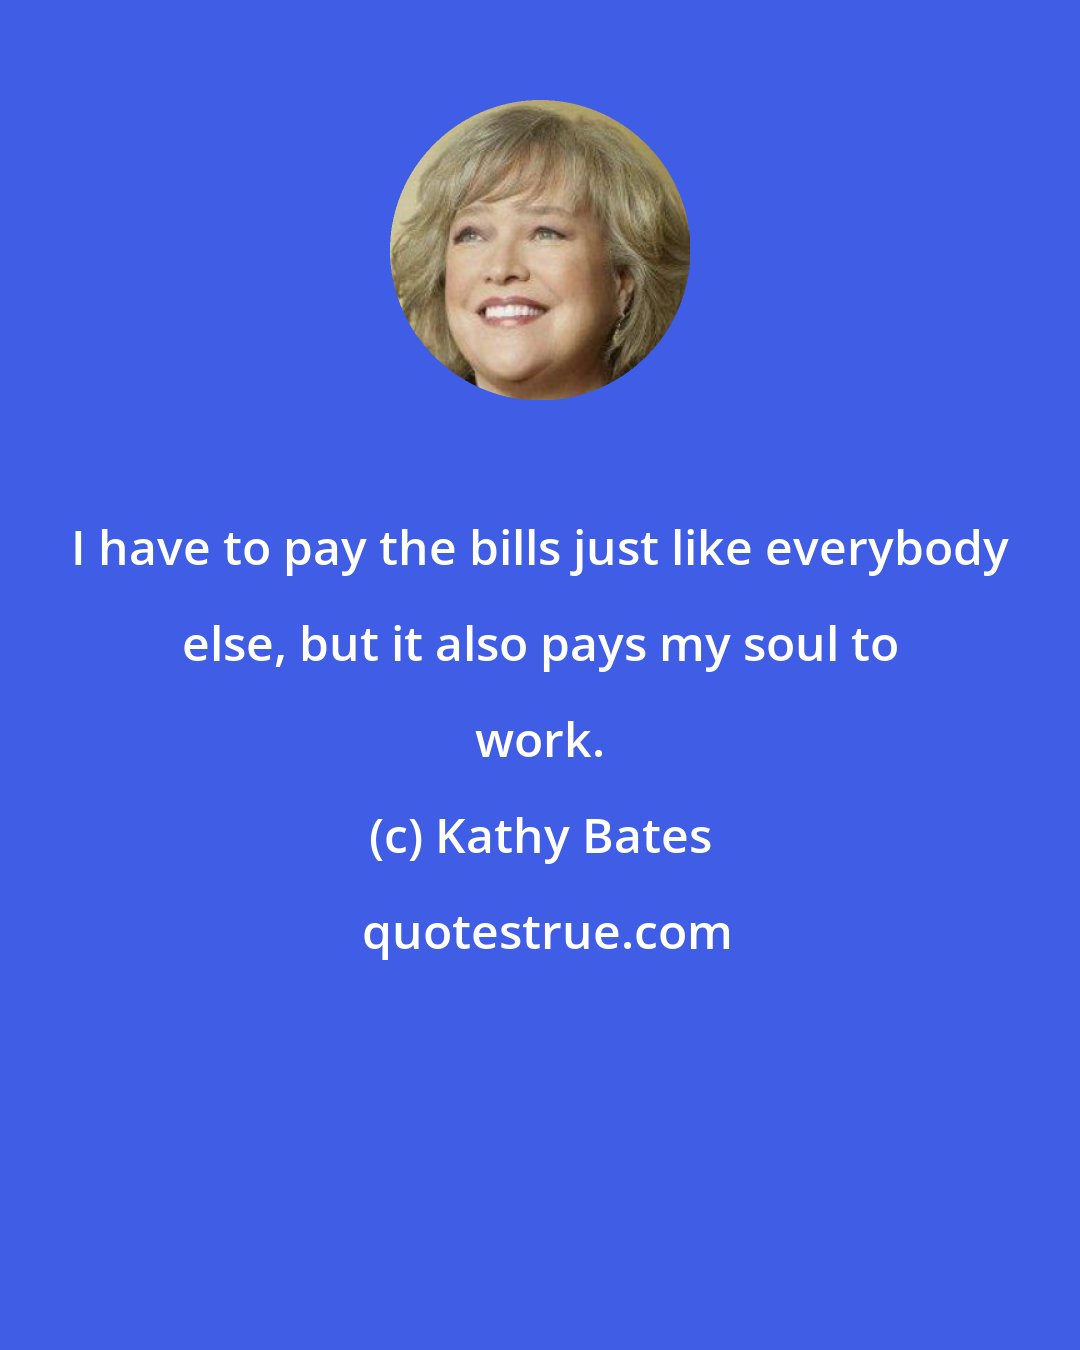 Kathy Bates: I have to pay the bills just like everybody else, but it also pays my soul to work.